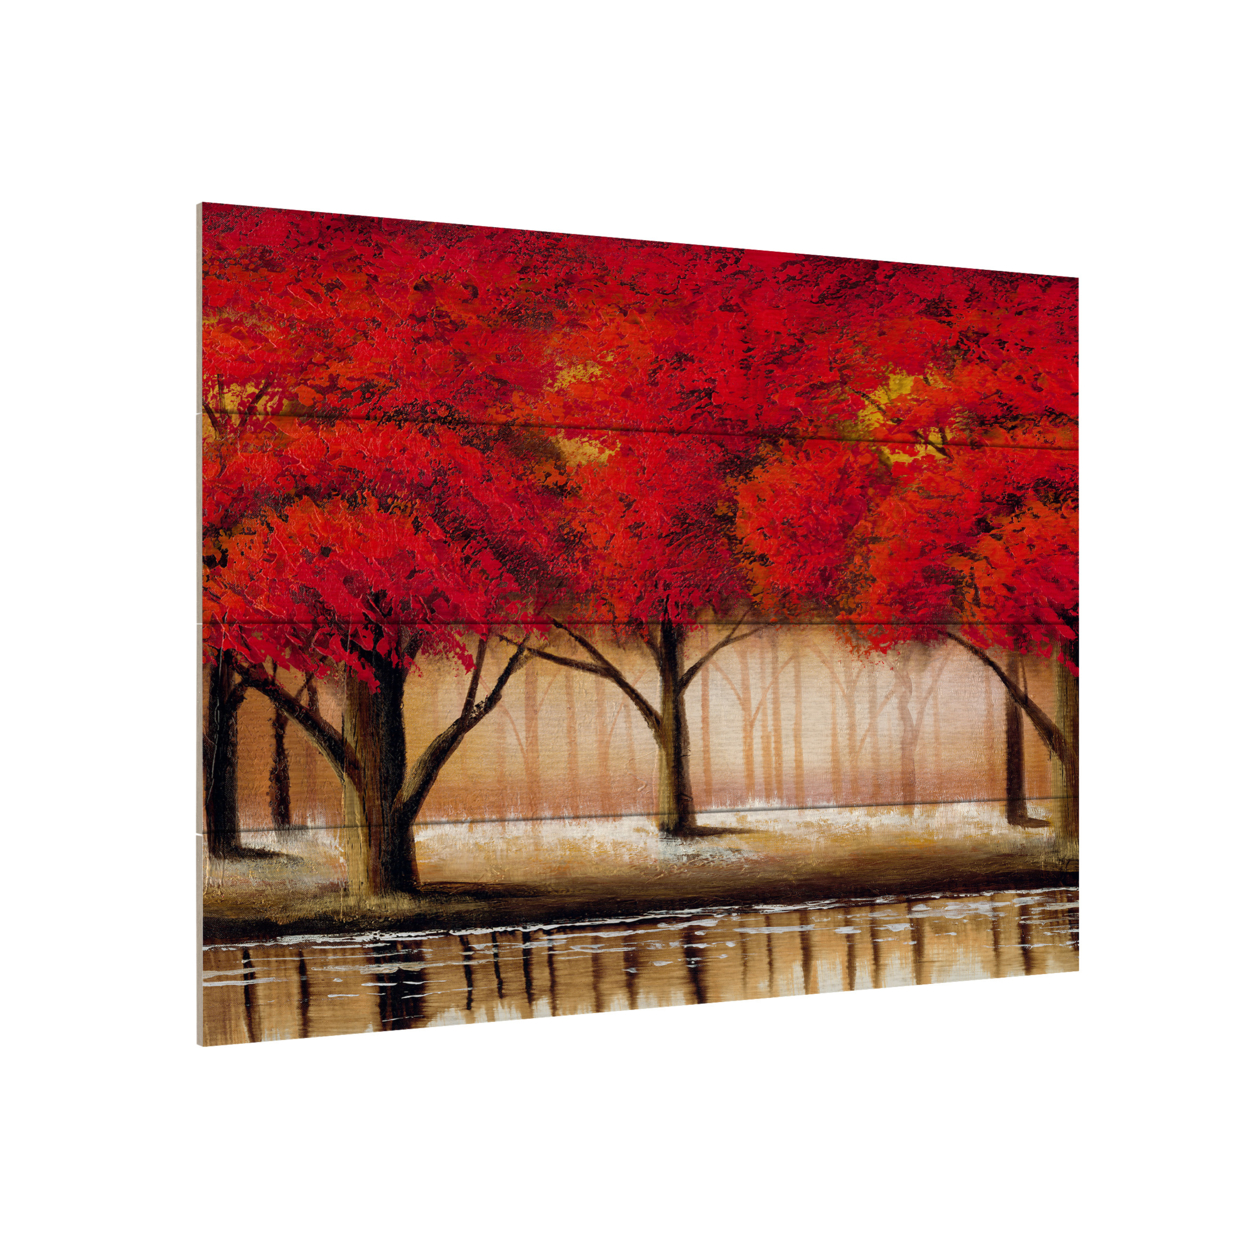 Wall Art 12 X 16 Inches Titled Parade Of Red Trees II Ready To Hang Printed On Wooden Planks